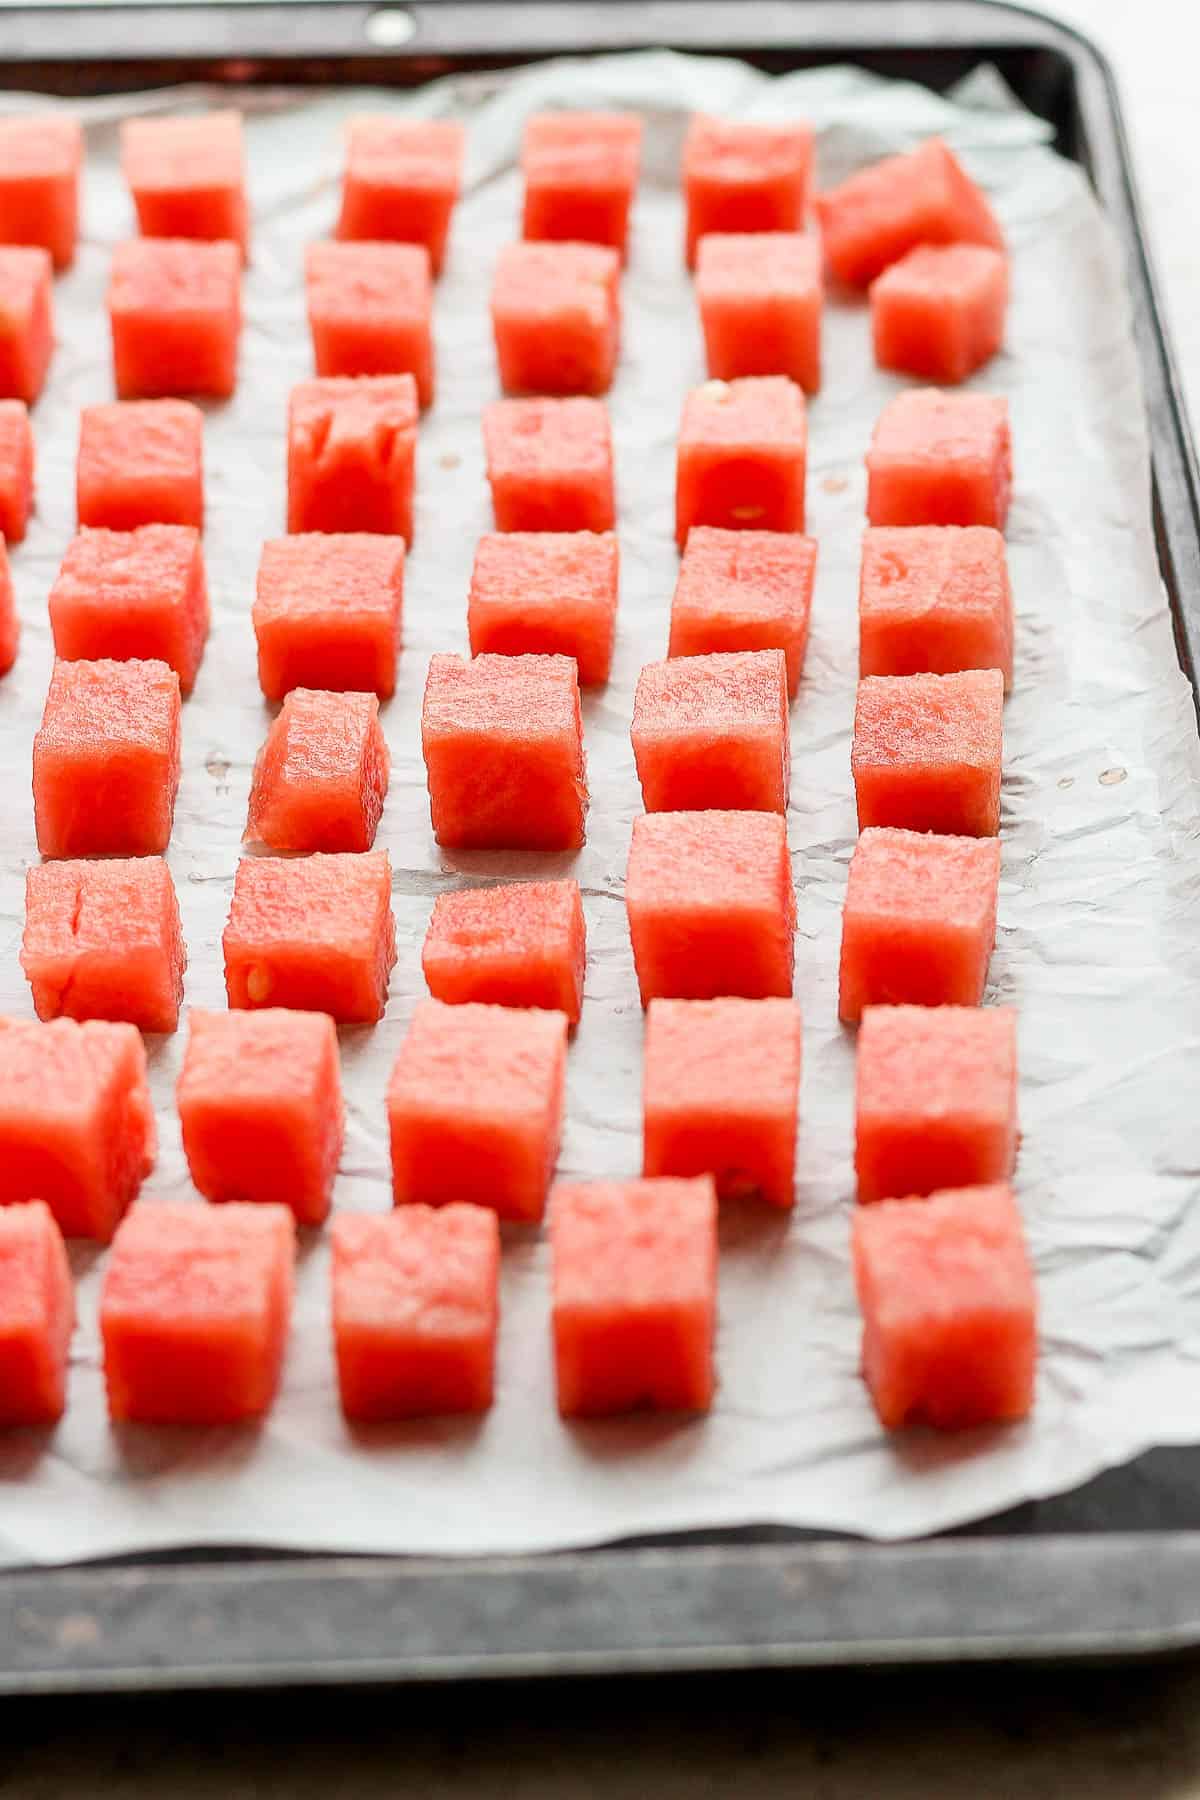 Large chunks of fresh watermelon on a parchment-lined baking sheet.